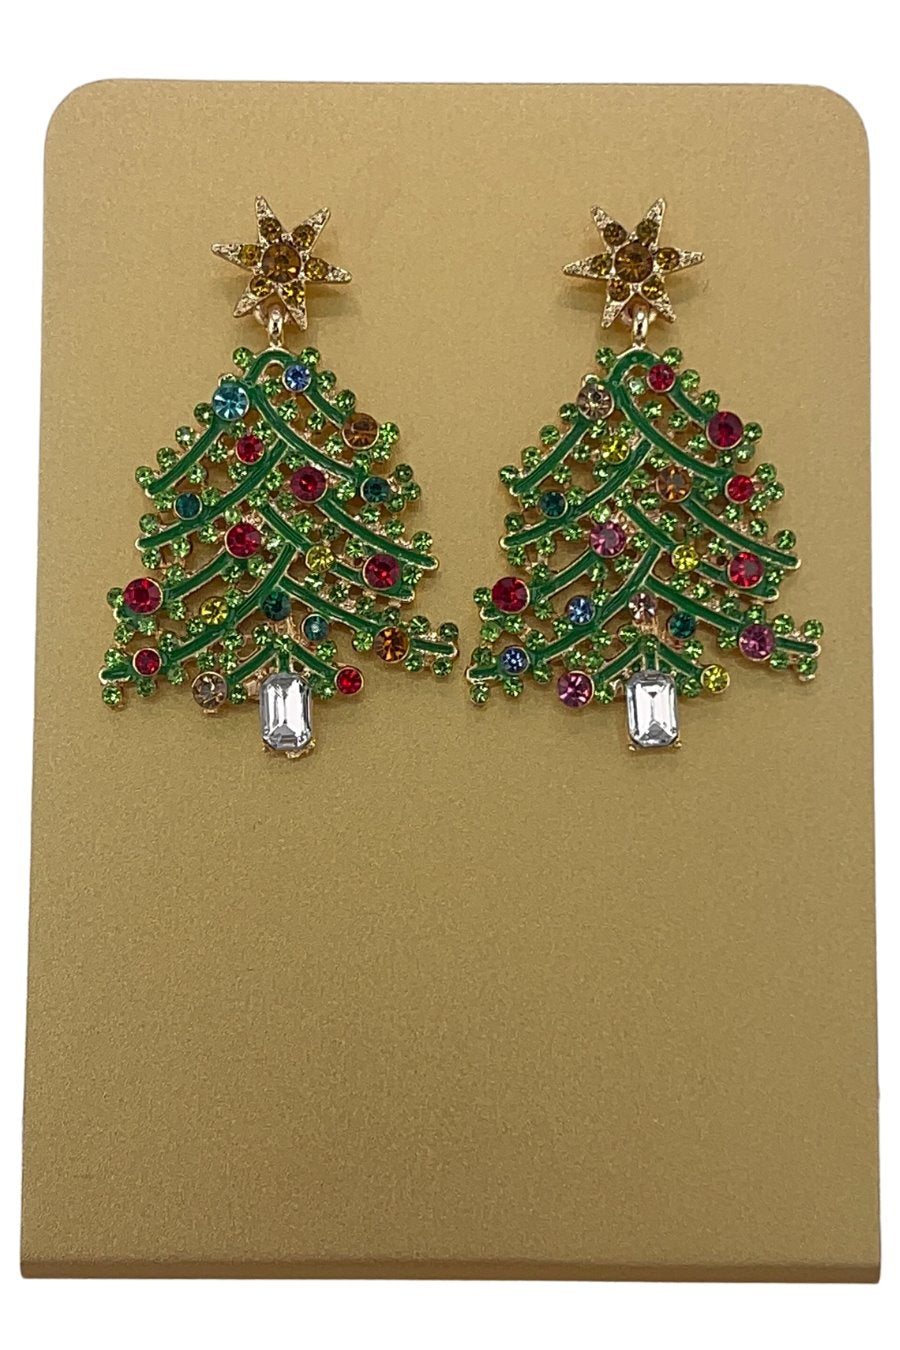 Decorating The Tree Earrings